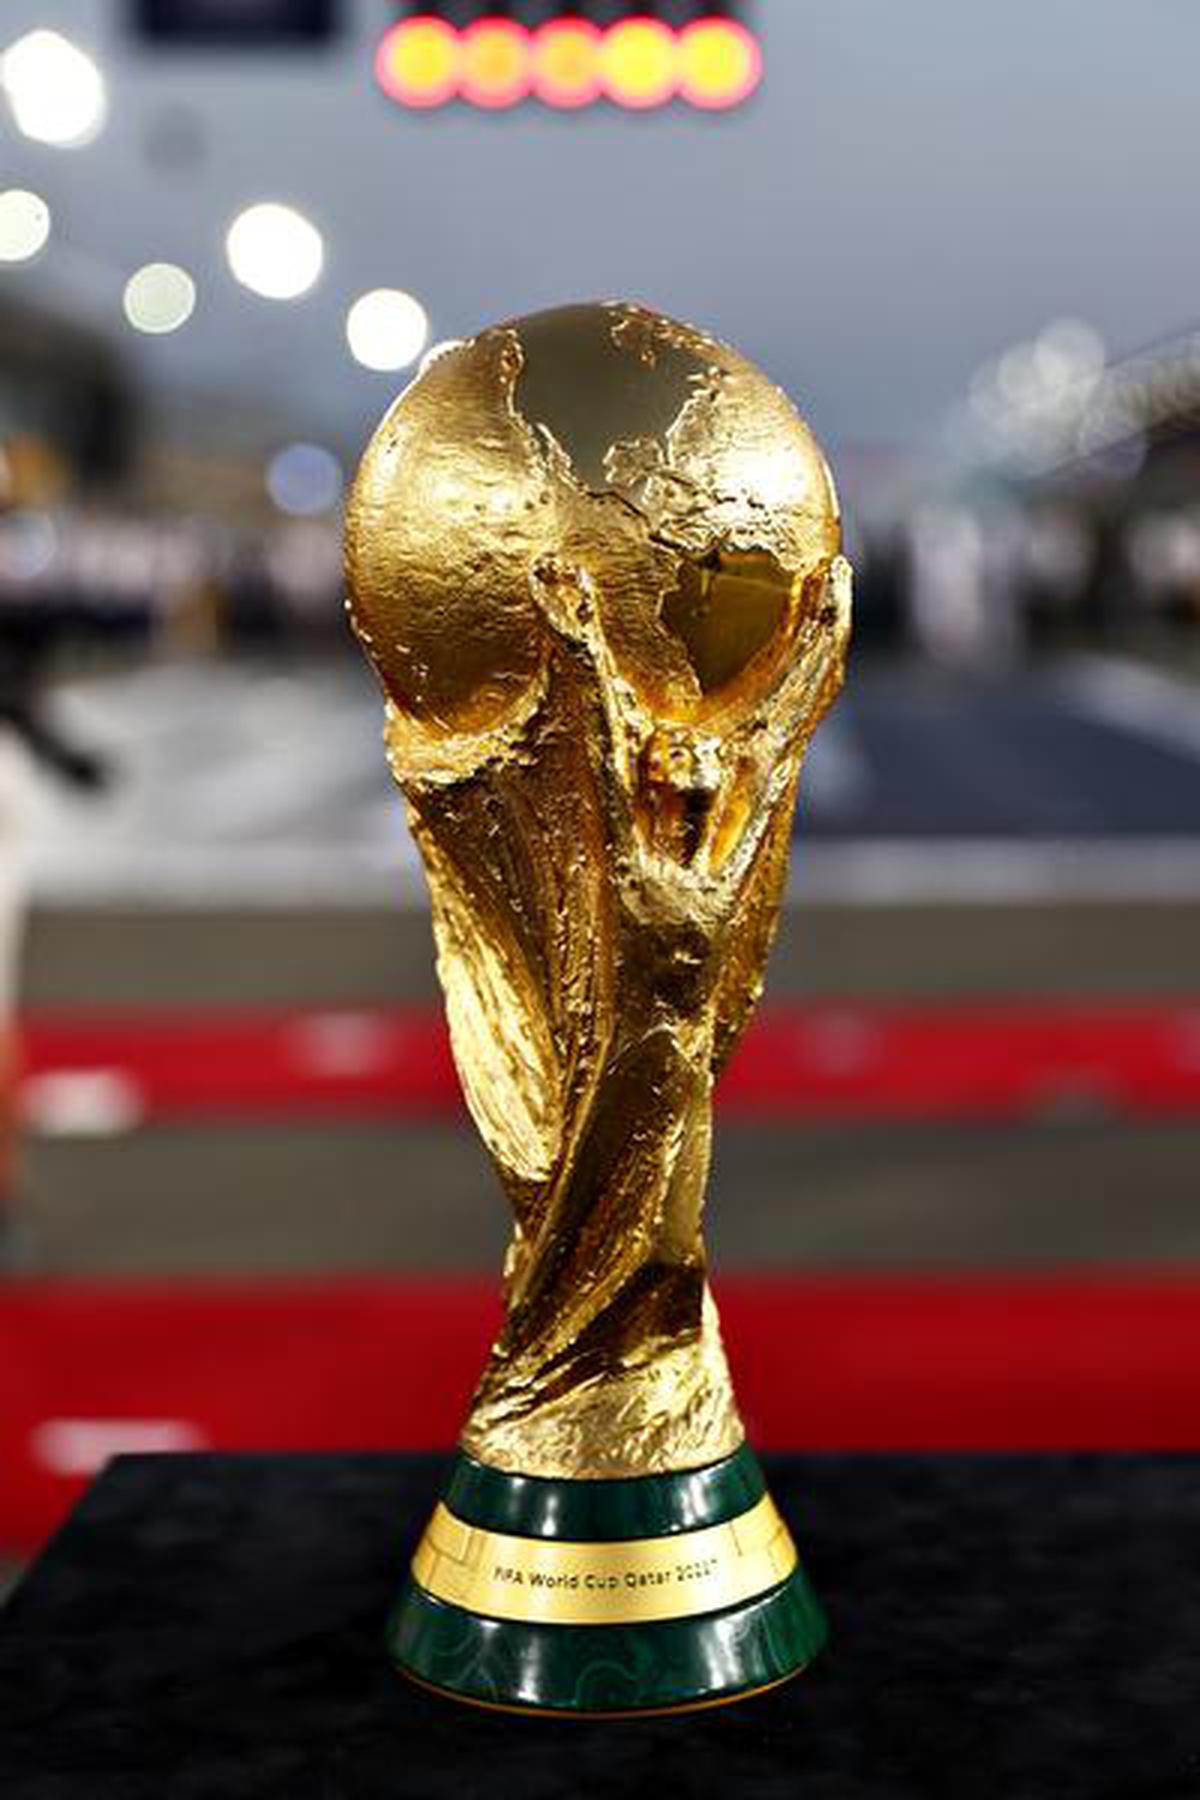 The FIFA World Cup trophy is pictured on the grid before the F1 Grand Prix of Qatar at Losail International Circuit on November 21, 2021 in Doha, Qatar.